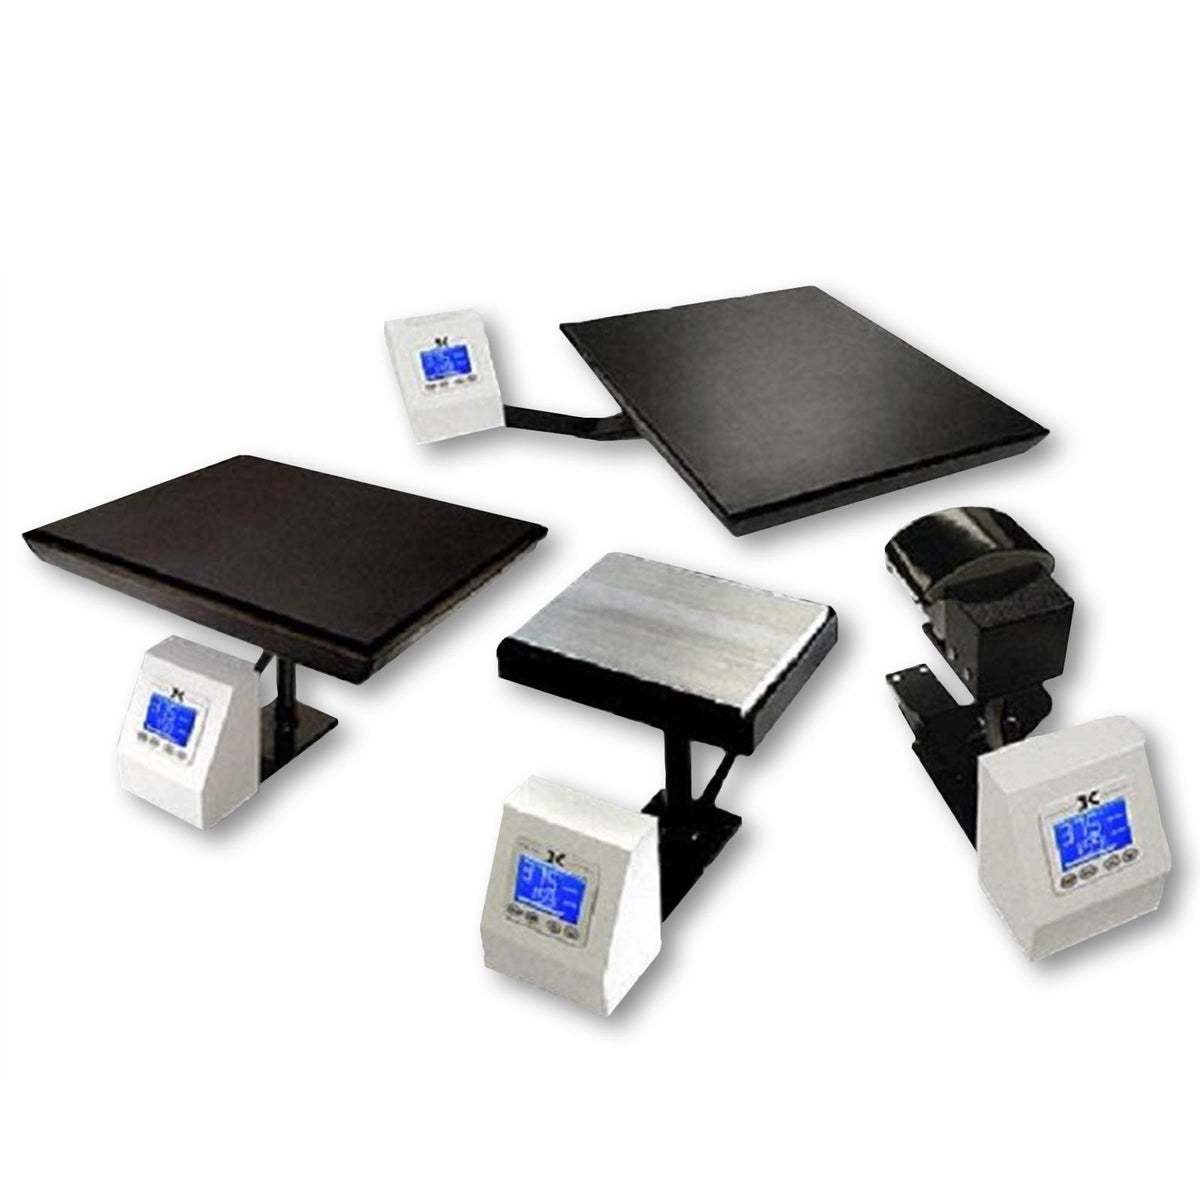 DK16 14x16 Clamshell Heat Press With Stand